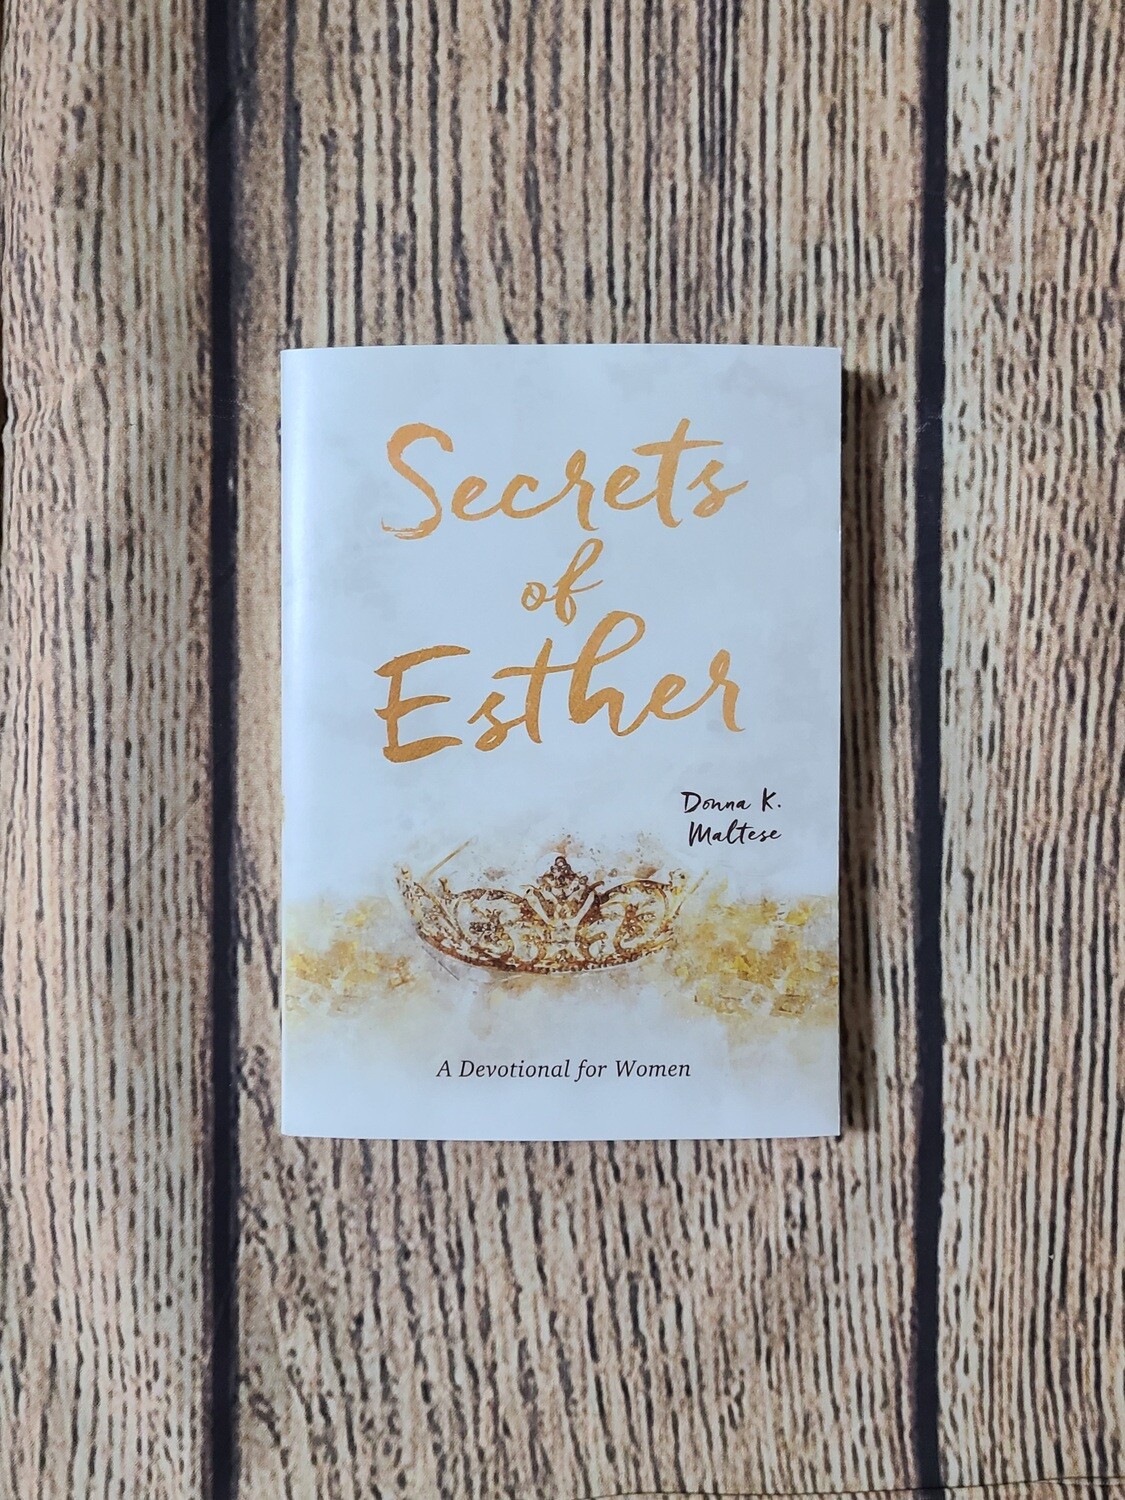 Secrets of Esther: A Devotional for Women by Donna K. Maltese - Paperback - New